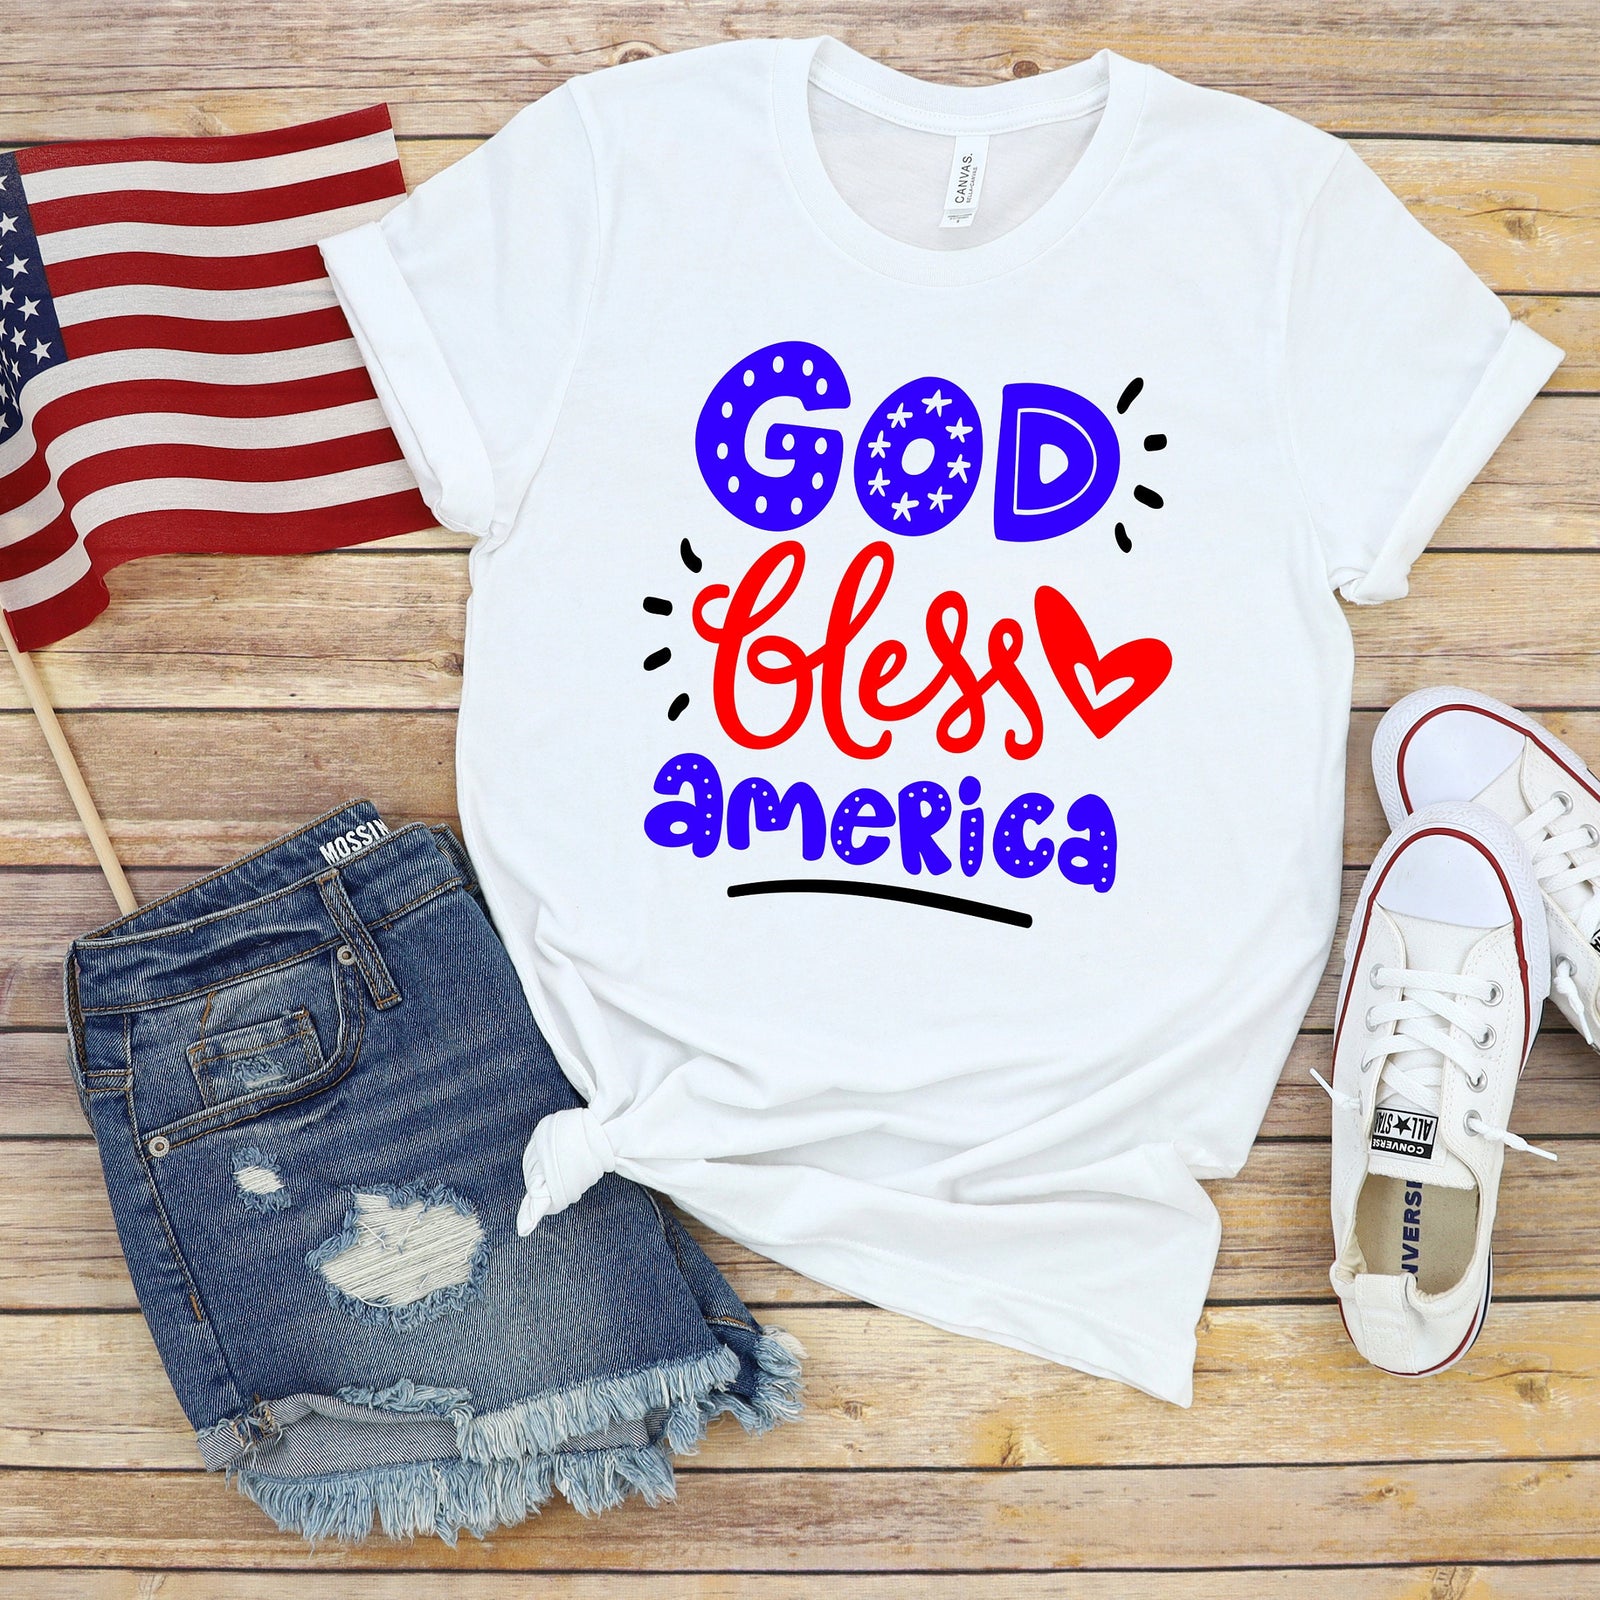 God Bless America - Fourth of July Adult T Shirt - Independence Day - Memorial - Red White and Blue